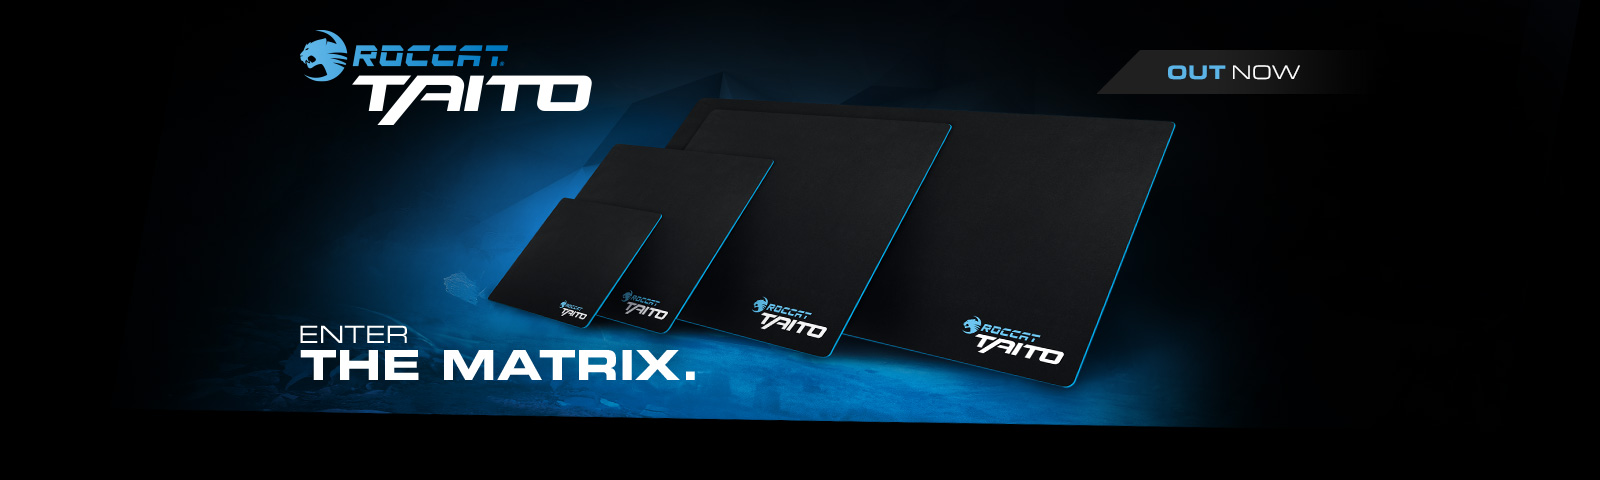 https://media.roccat.org/img/products/Taito-2017/teaser/main/1473084121/background/all/main-teaser-taito2017-v2.jpg